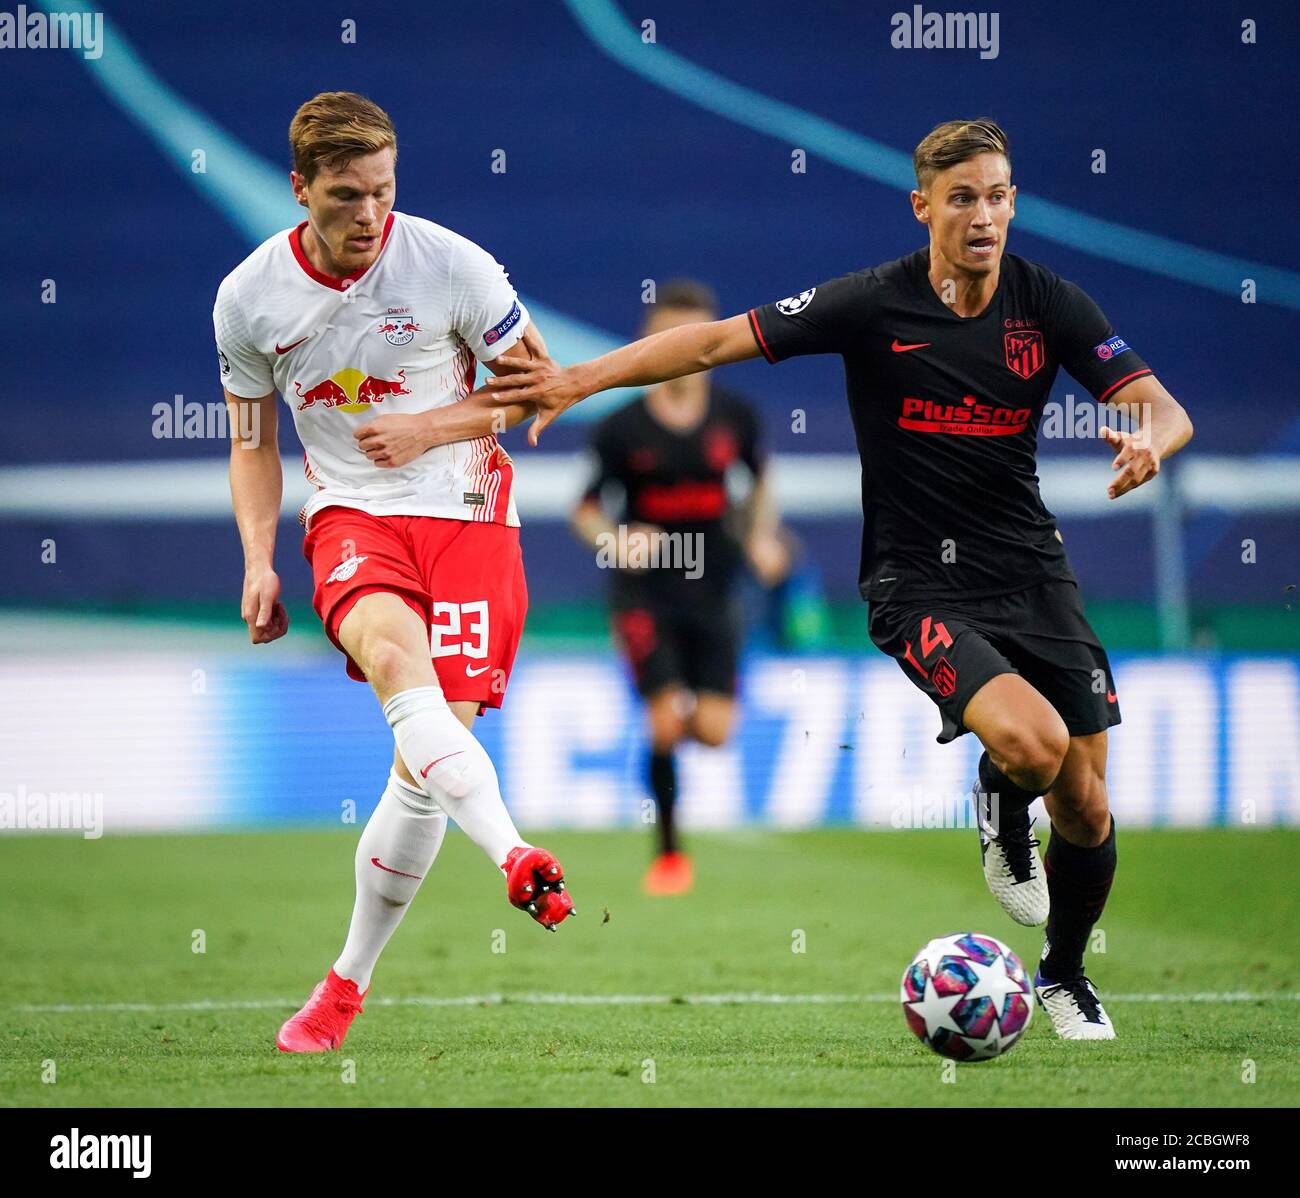 firo Champions League 1/4 final 08/13/2020 RB Leipzig - Atletico Madrid  Lisbon, Portugal, 13th August 2020, Marcel Halstenberg (RBL), Marcos  Llorente (Atletico) in the quarterfinal UEFA Champions League match final  tournament RB